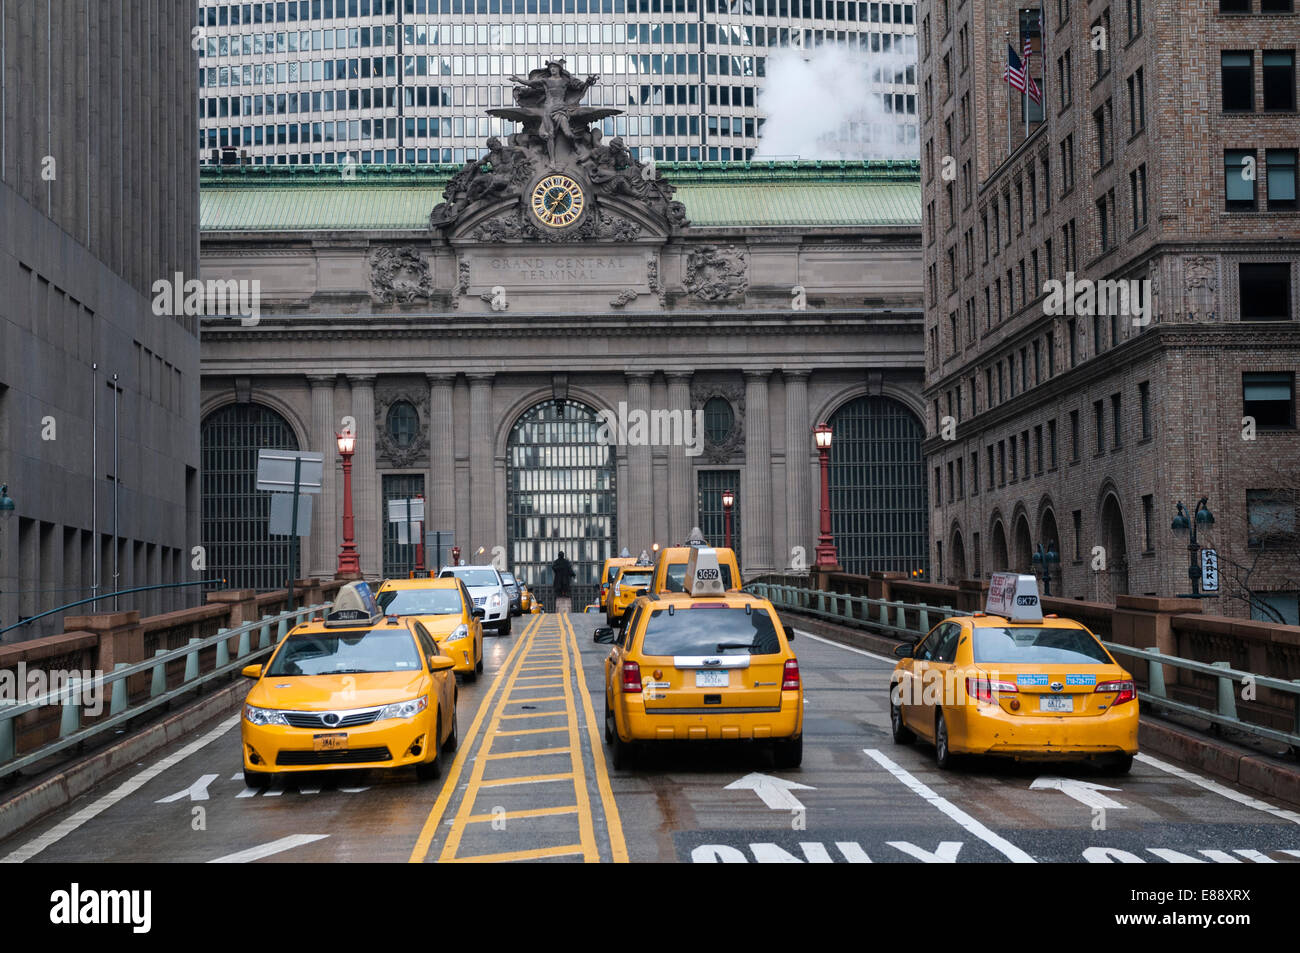 Grand Central Station, New York City, United States of America, North America Stock Photo